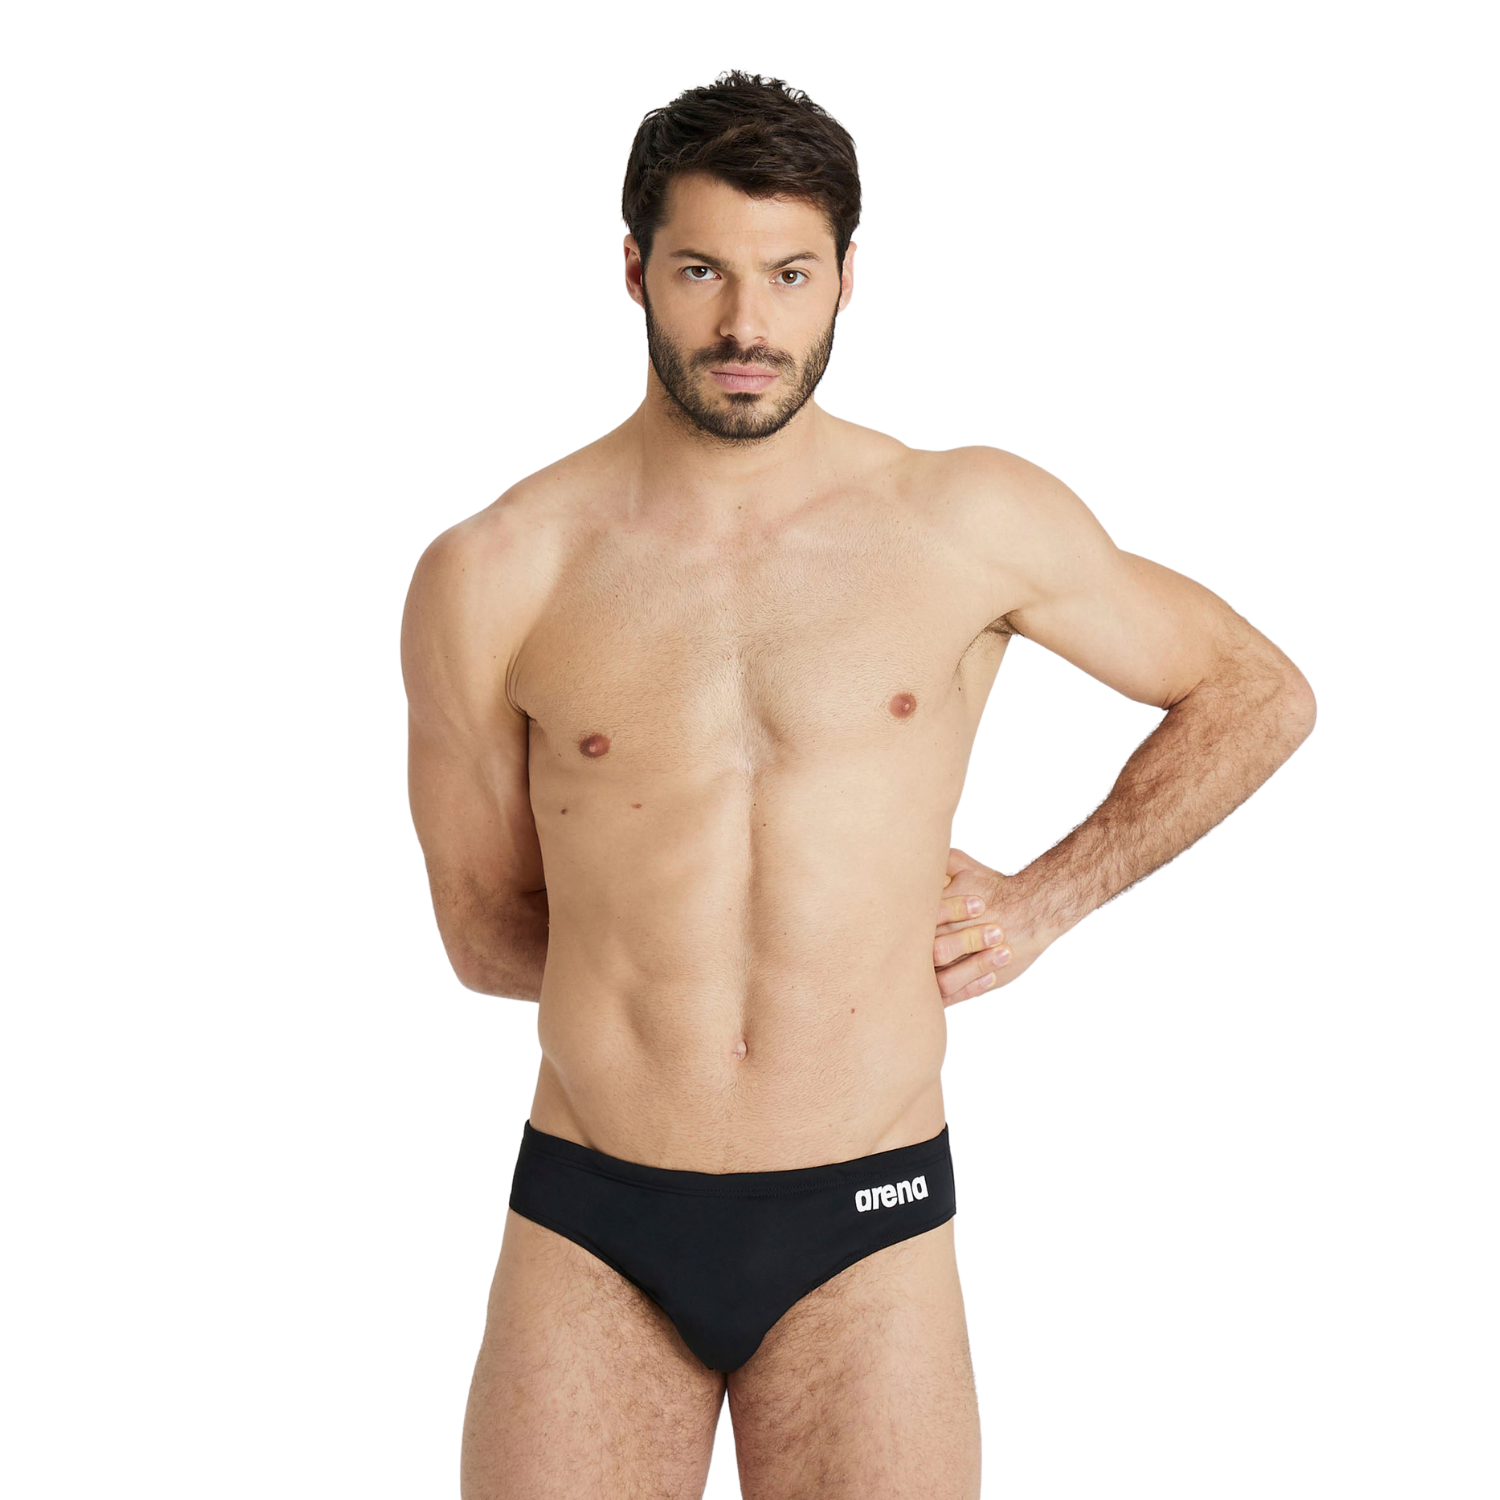 MENS ARENA Briefs Style Training Suits